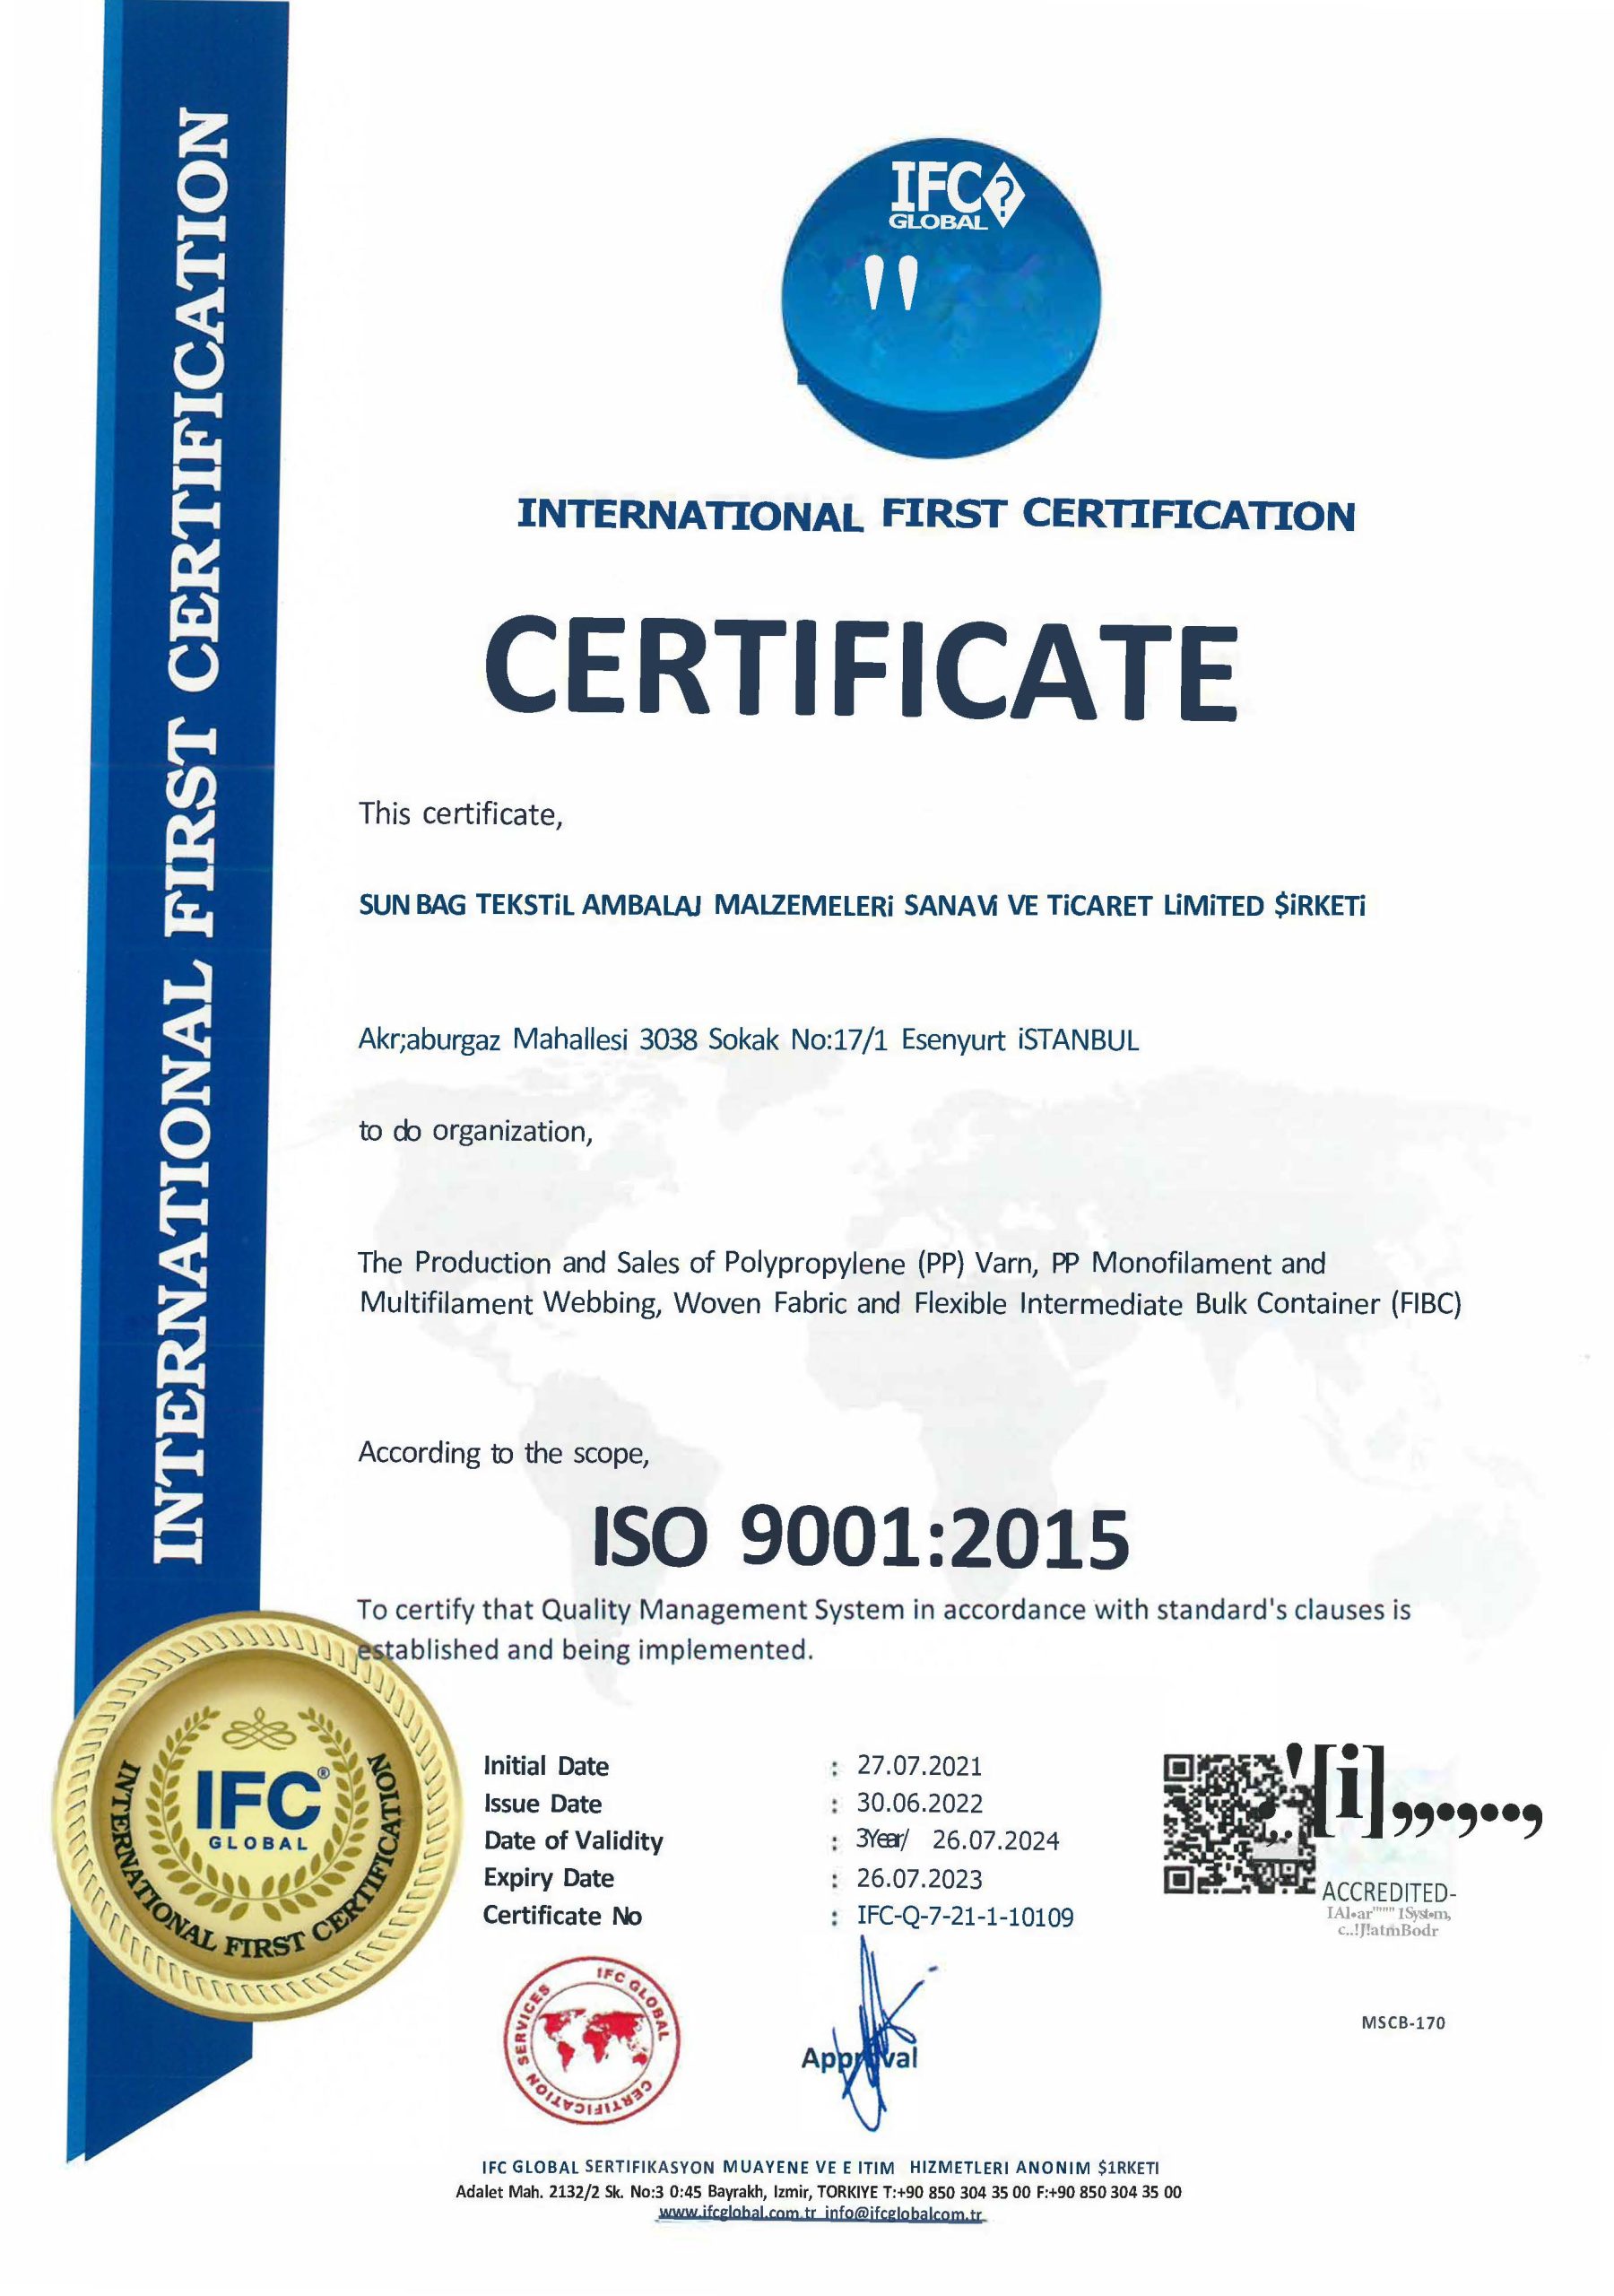 621-iso-9001-2015-quality-management-system